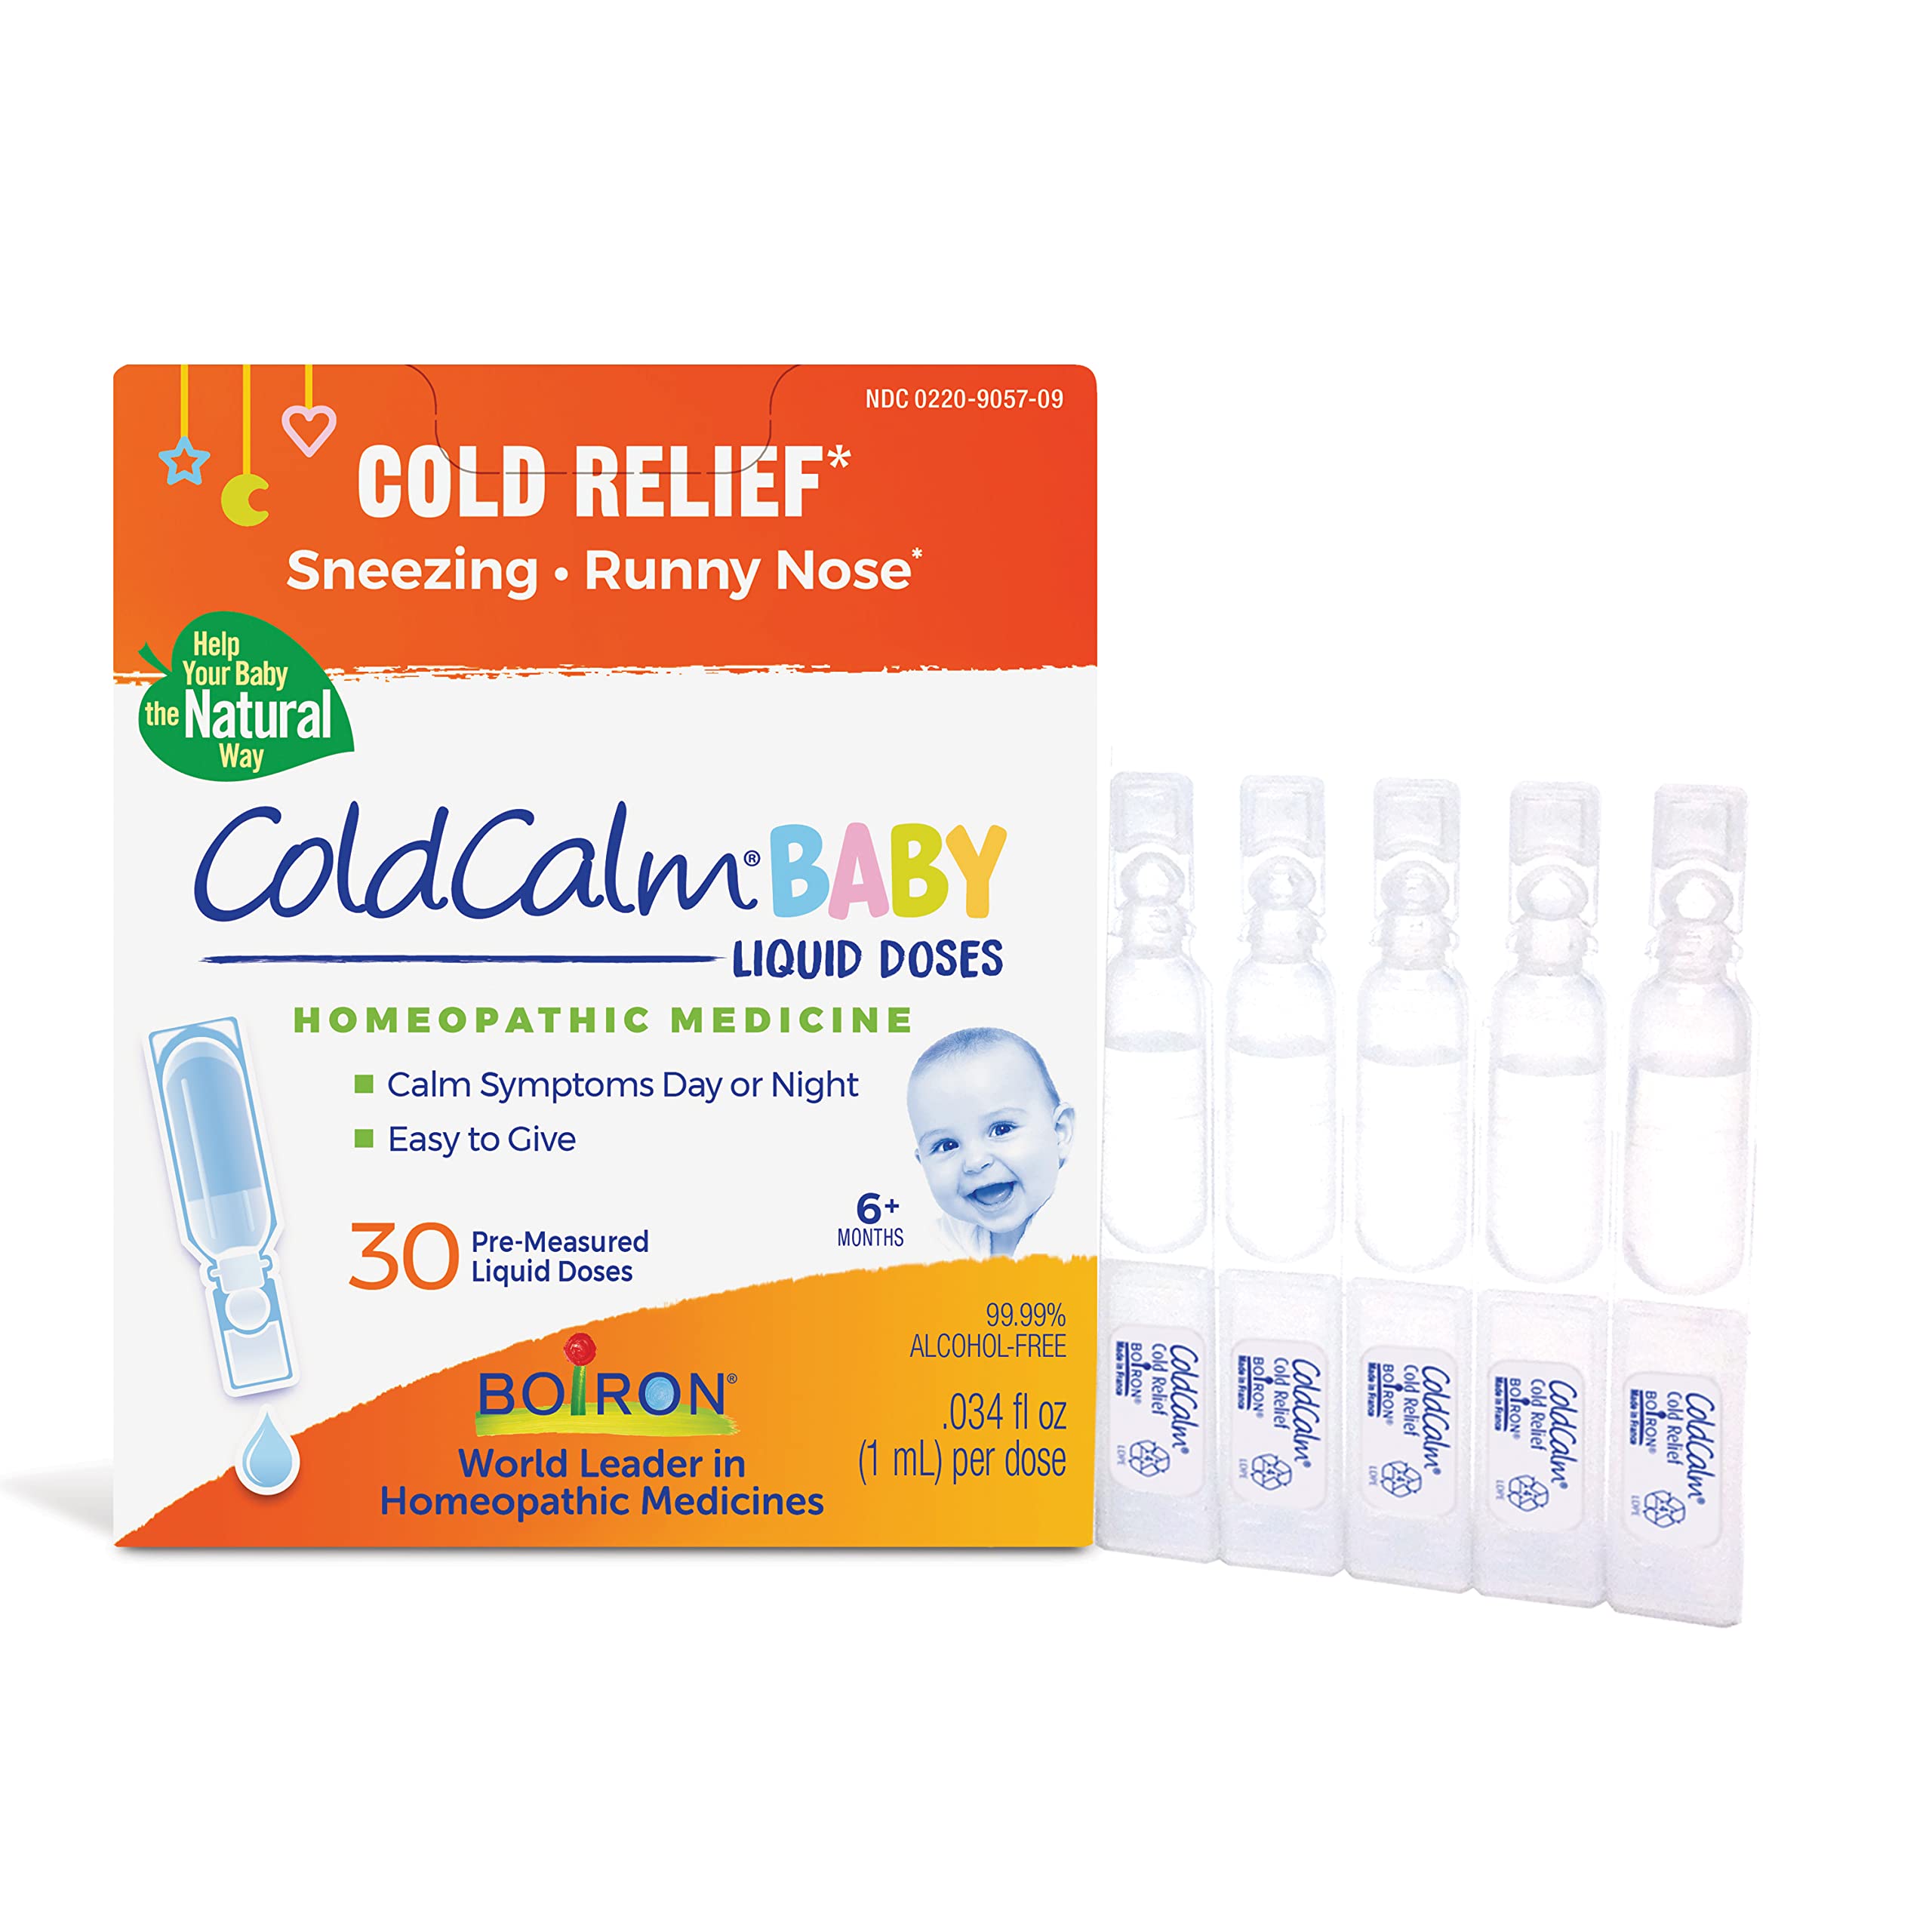 Boiron ColdCalm Baby Single-Use Drops for Relief from Cold Symptoms of Sneezing, Runny Nose, and Nasal Congestion - Sterile and Non-Drowsy Liquid Doses - 30 Count